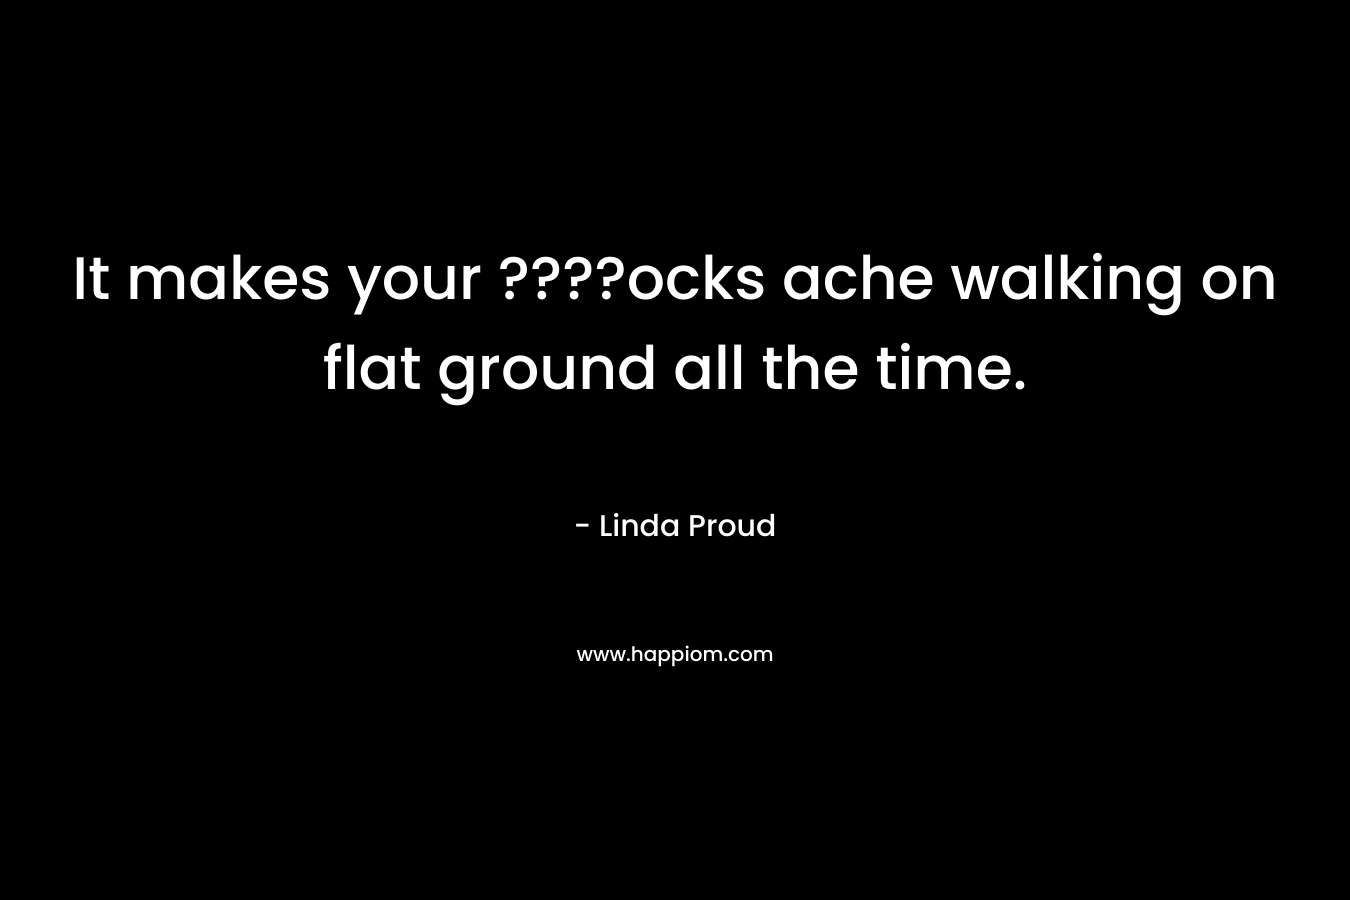 It makes your ????ocks ache walking on flat ground all the time. – Linda Proud